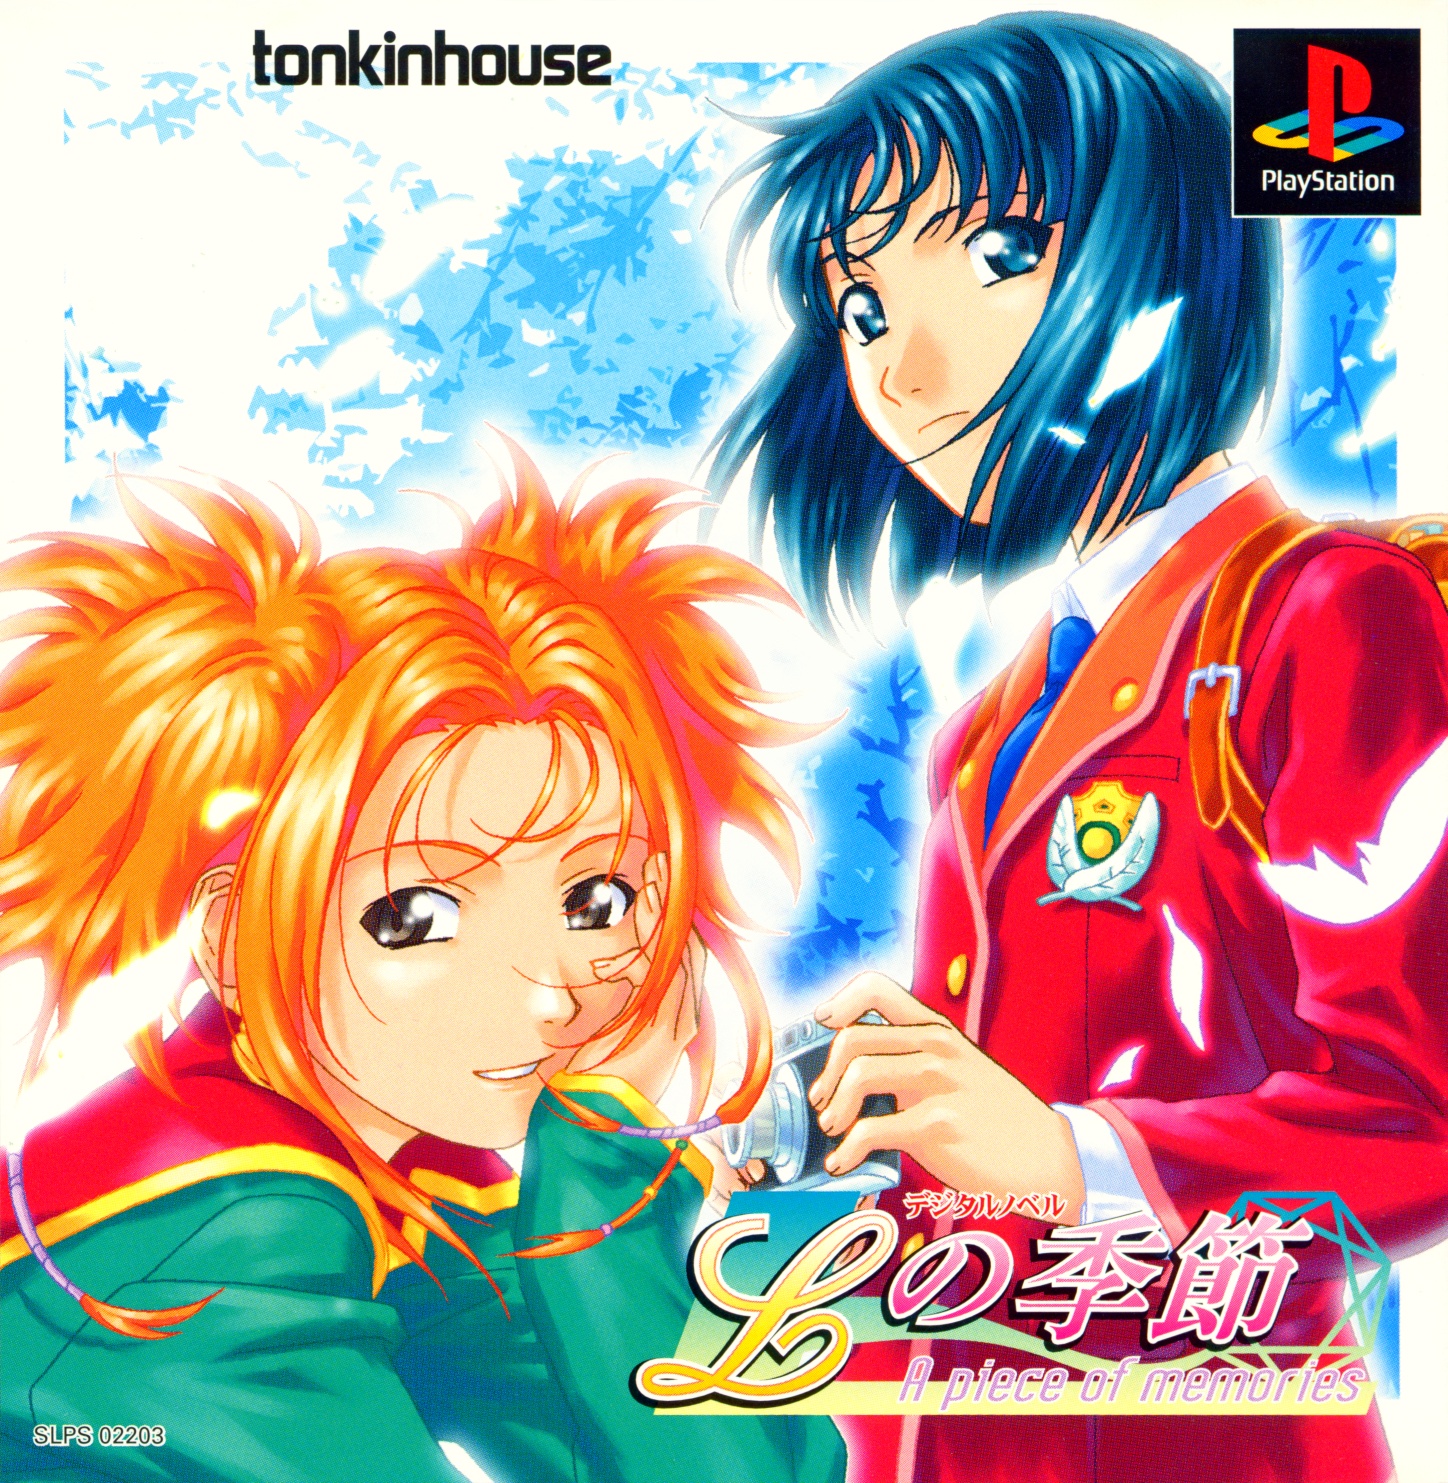 L No Kisetsu - A Piece of Memories [Limited Edition] PSX cover